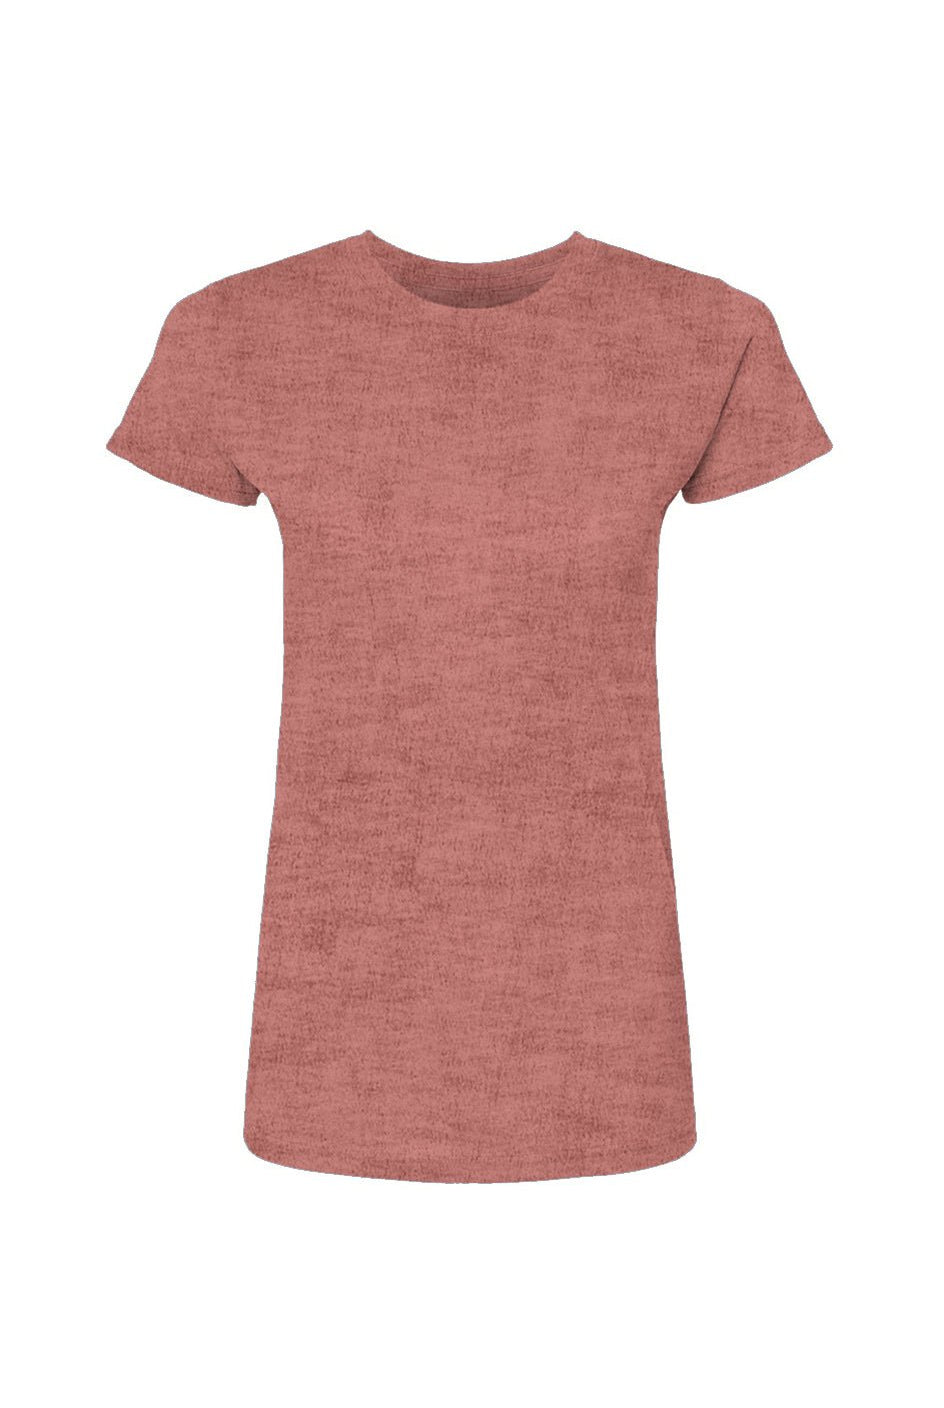 Women's Heather Red Poly-Rich T-Shirt - Women's T-shirt - Apliiq - Women's Heather Red Poly-Rich T-Shirt - APQ-4651972S5A0 - xs - heather red - Comfortable Fashion Tee - Dragon Foxx™ - Durable Women's Apparel